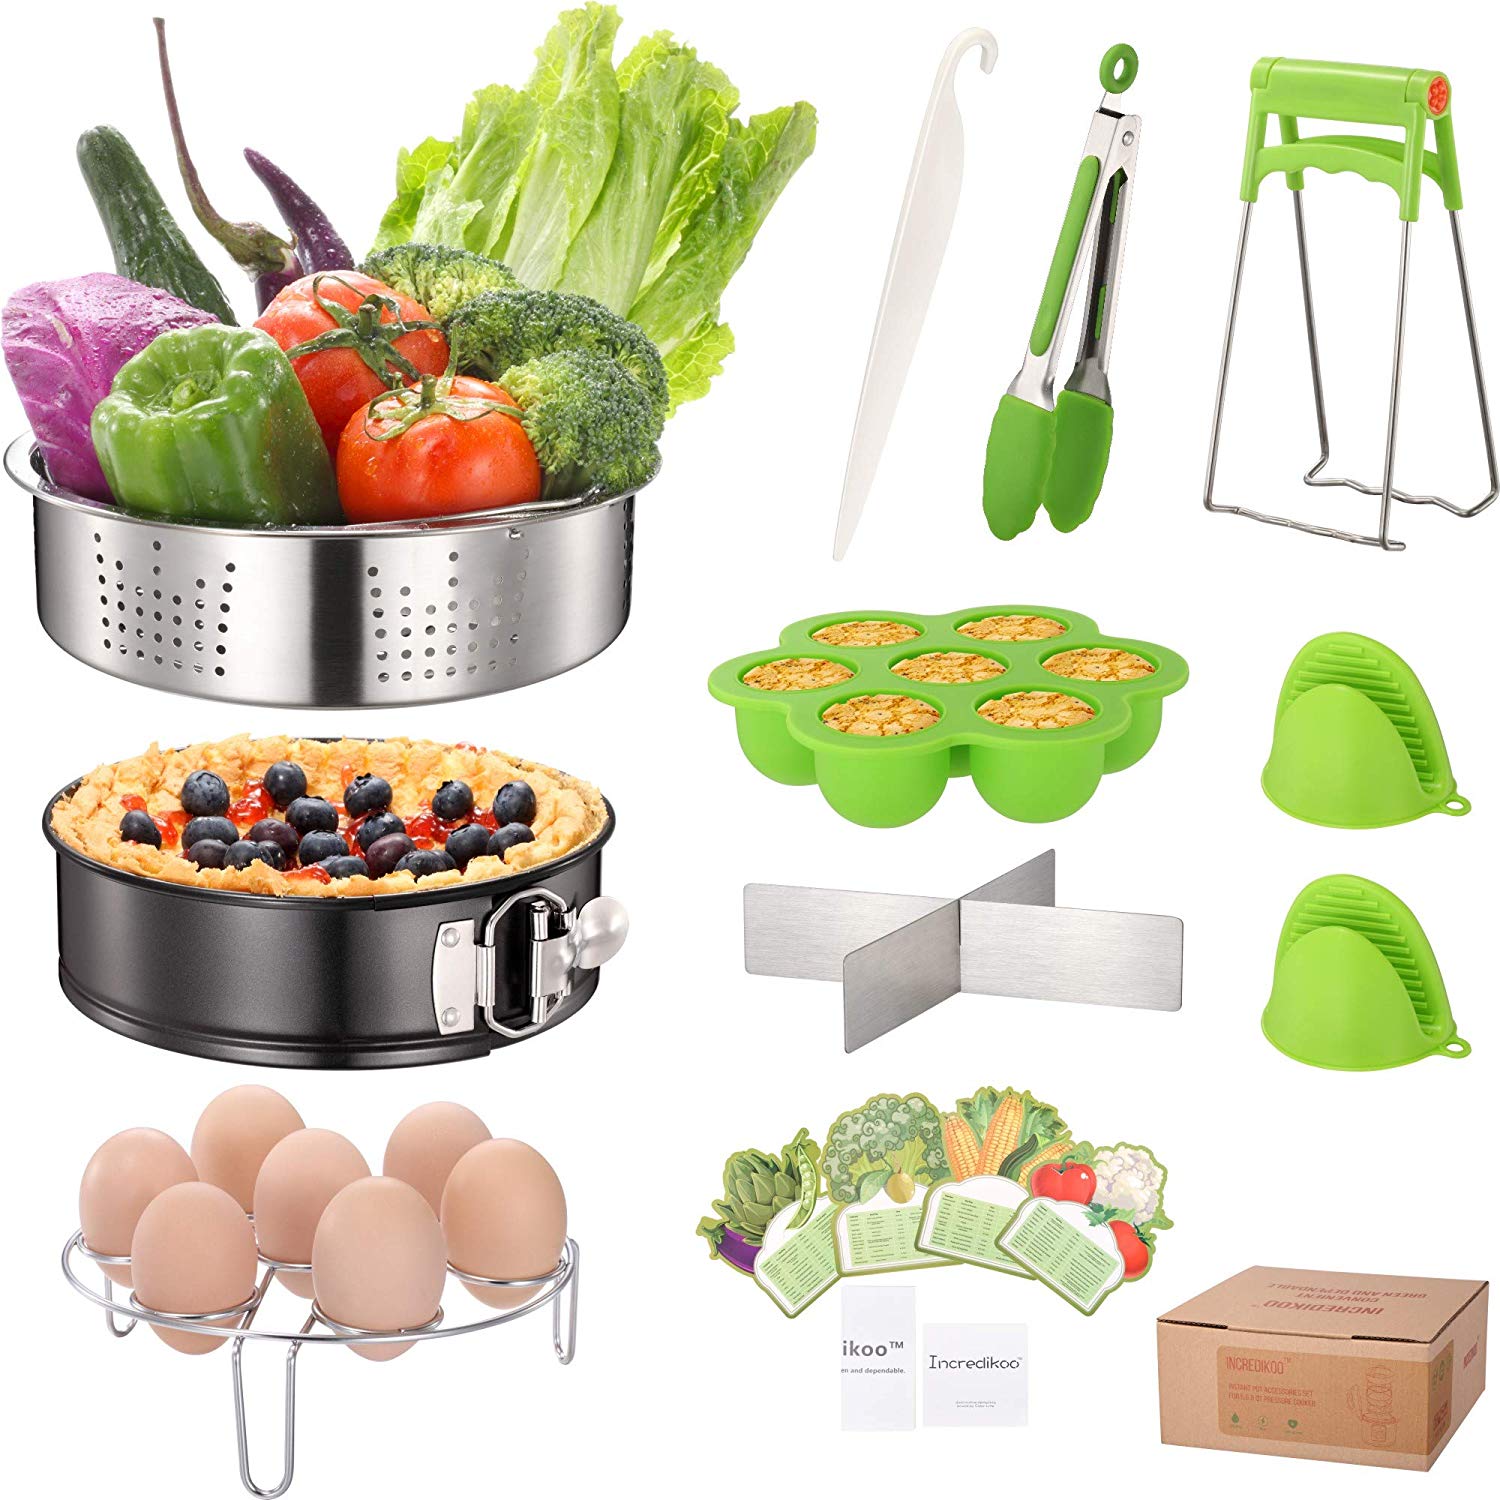 Electric Pressure Cookers Accessories Set Compatible With Instant Pot 5, 6, 8 Quart, Stainless Steel Steamer Basket, Non-Stick Springform Pan, Egg Rack Trivet, Silicone Egg Bites Mold, Mitts and More